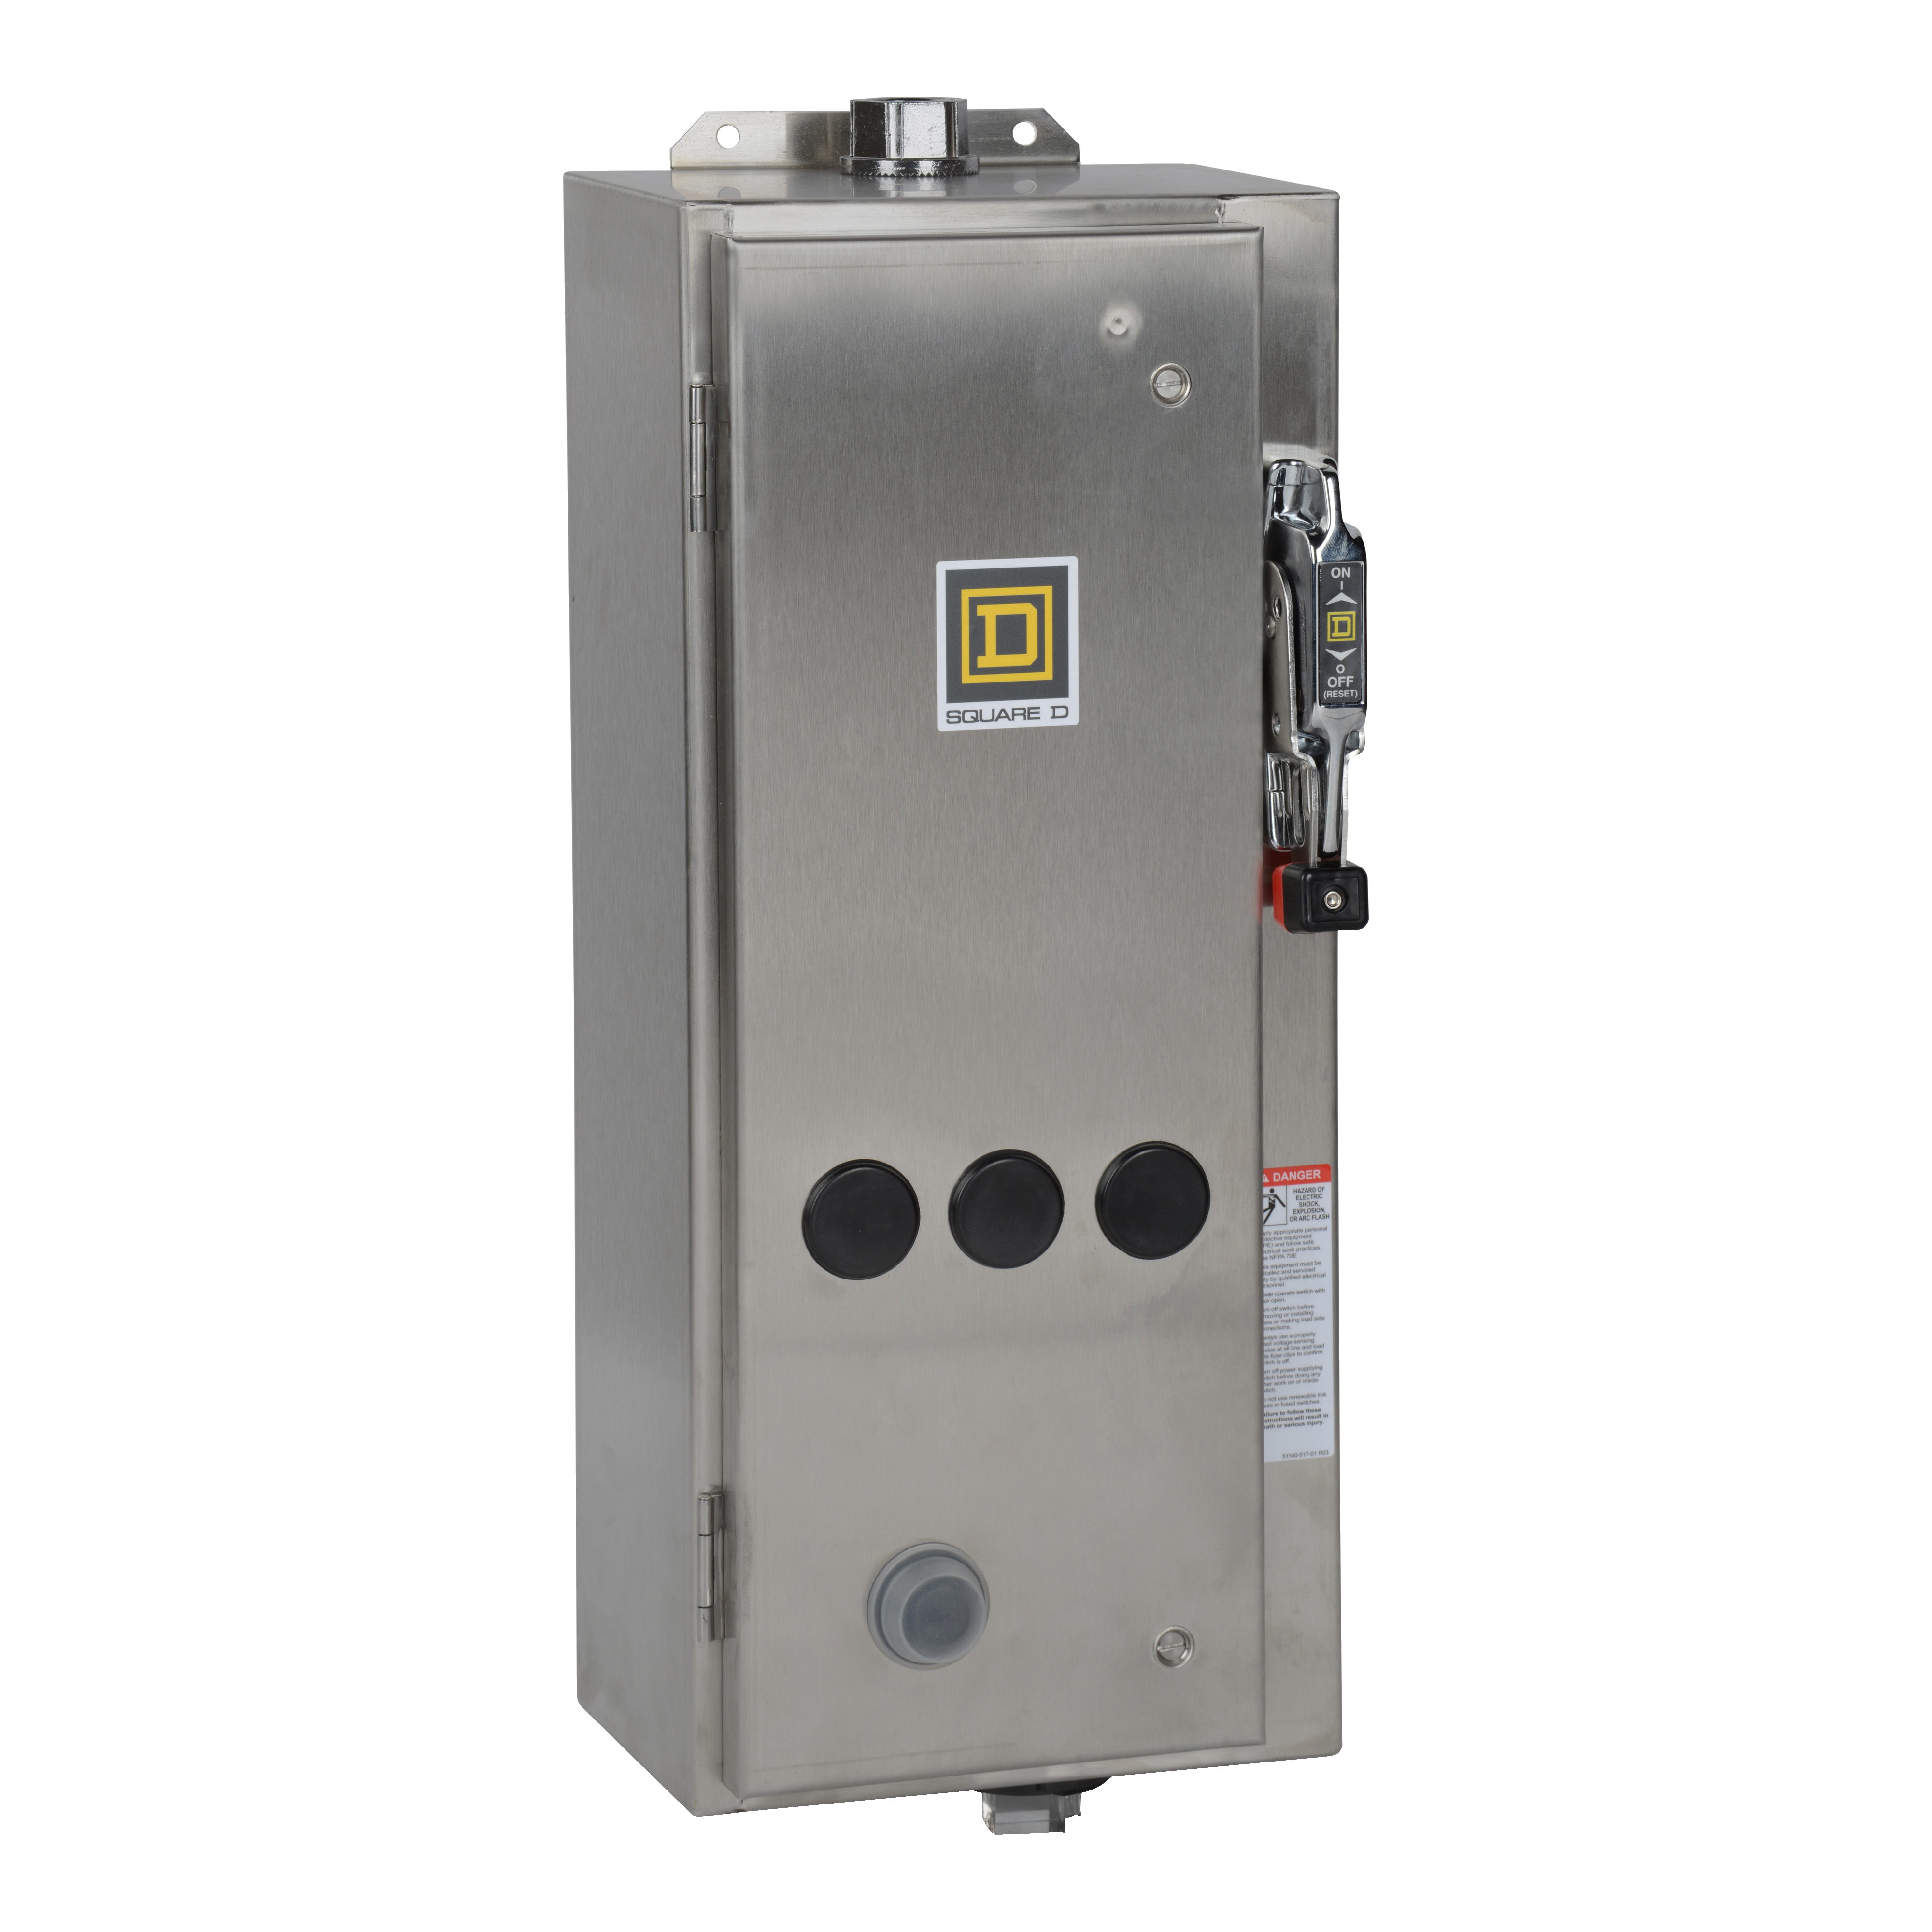 NEMA Combination Starter, Type S, 30A fusible disconnect, Size 1, 27A, 5 HP at 240 VAC polyphase, 120 VAC coil, NEMA 4X